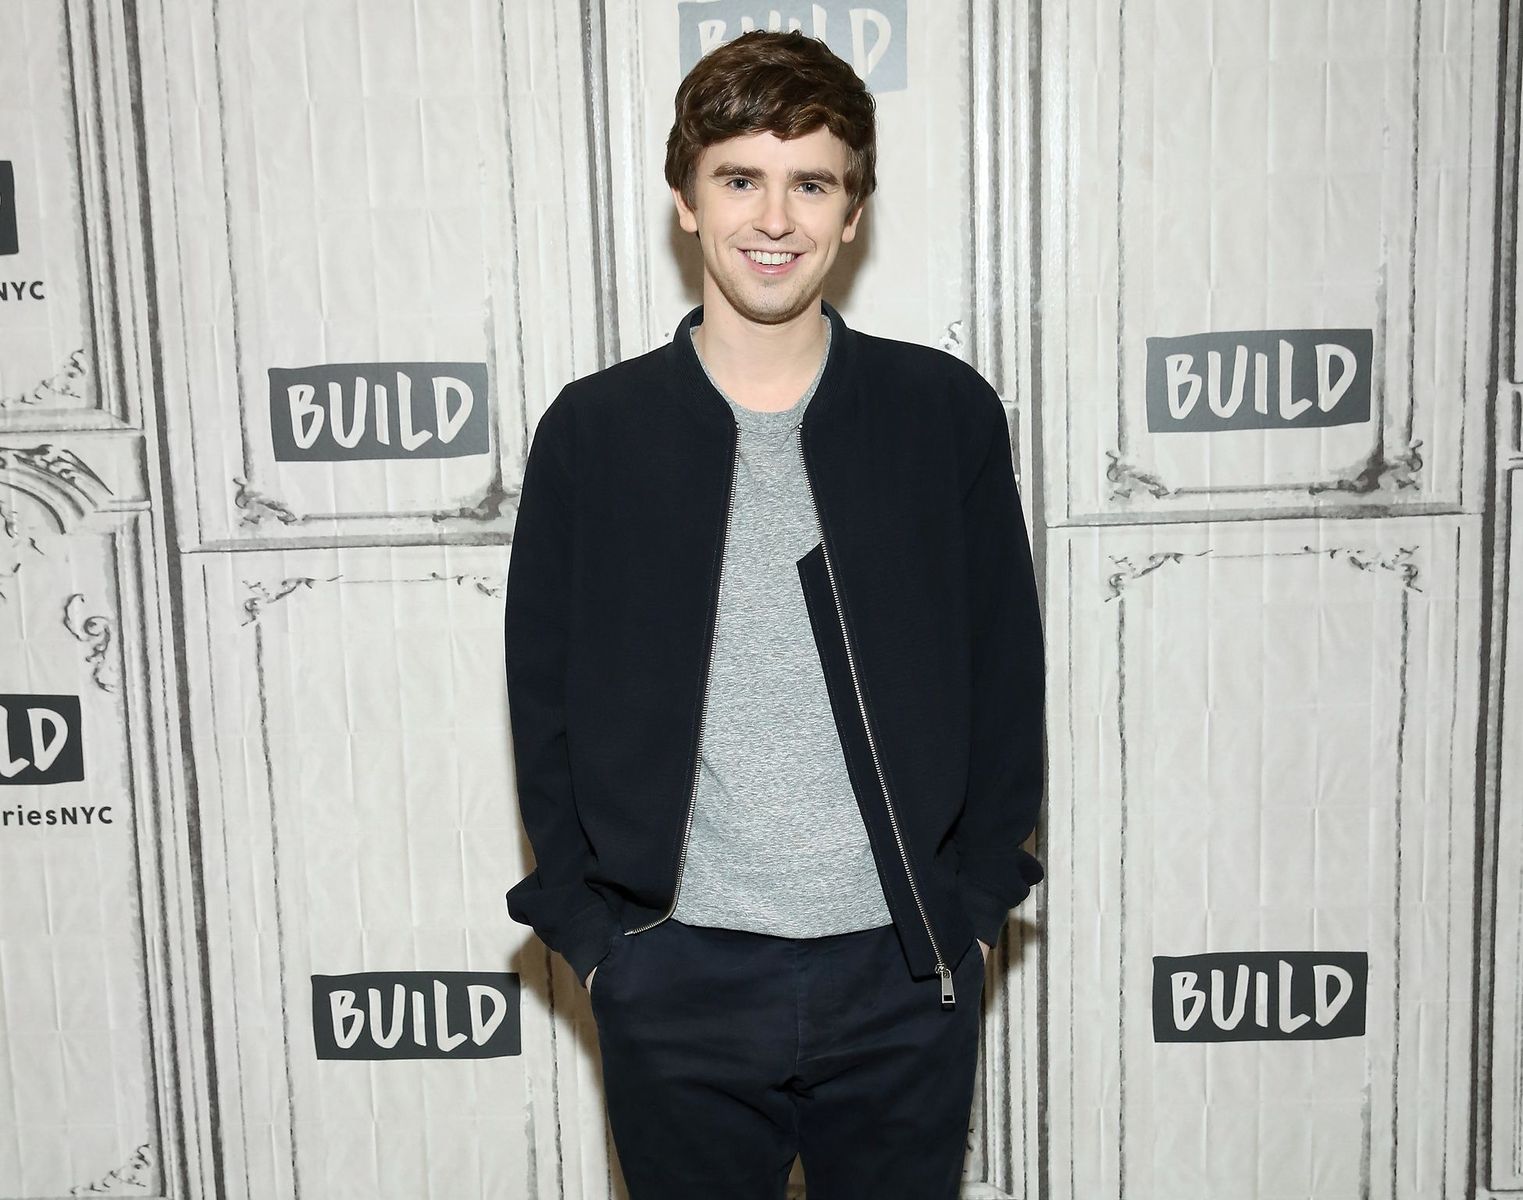 Image Credits: Getty Images / Freddie Highmore